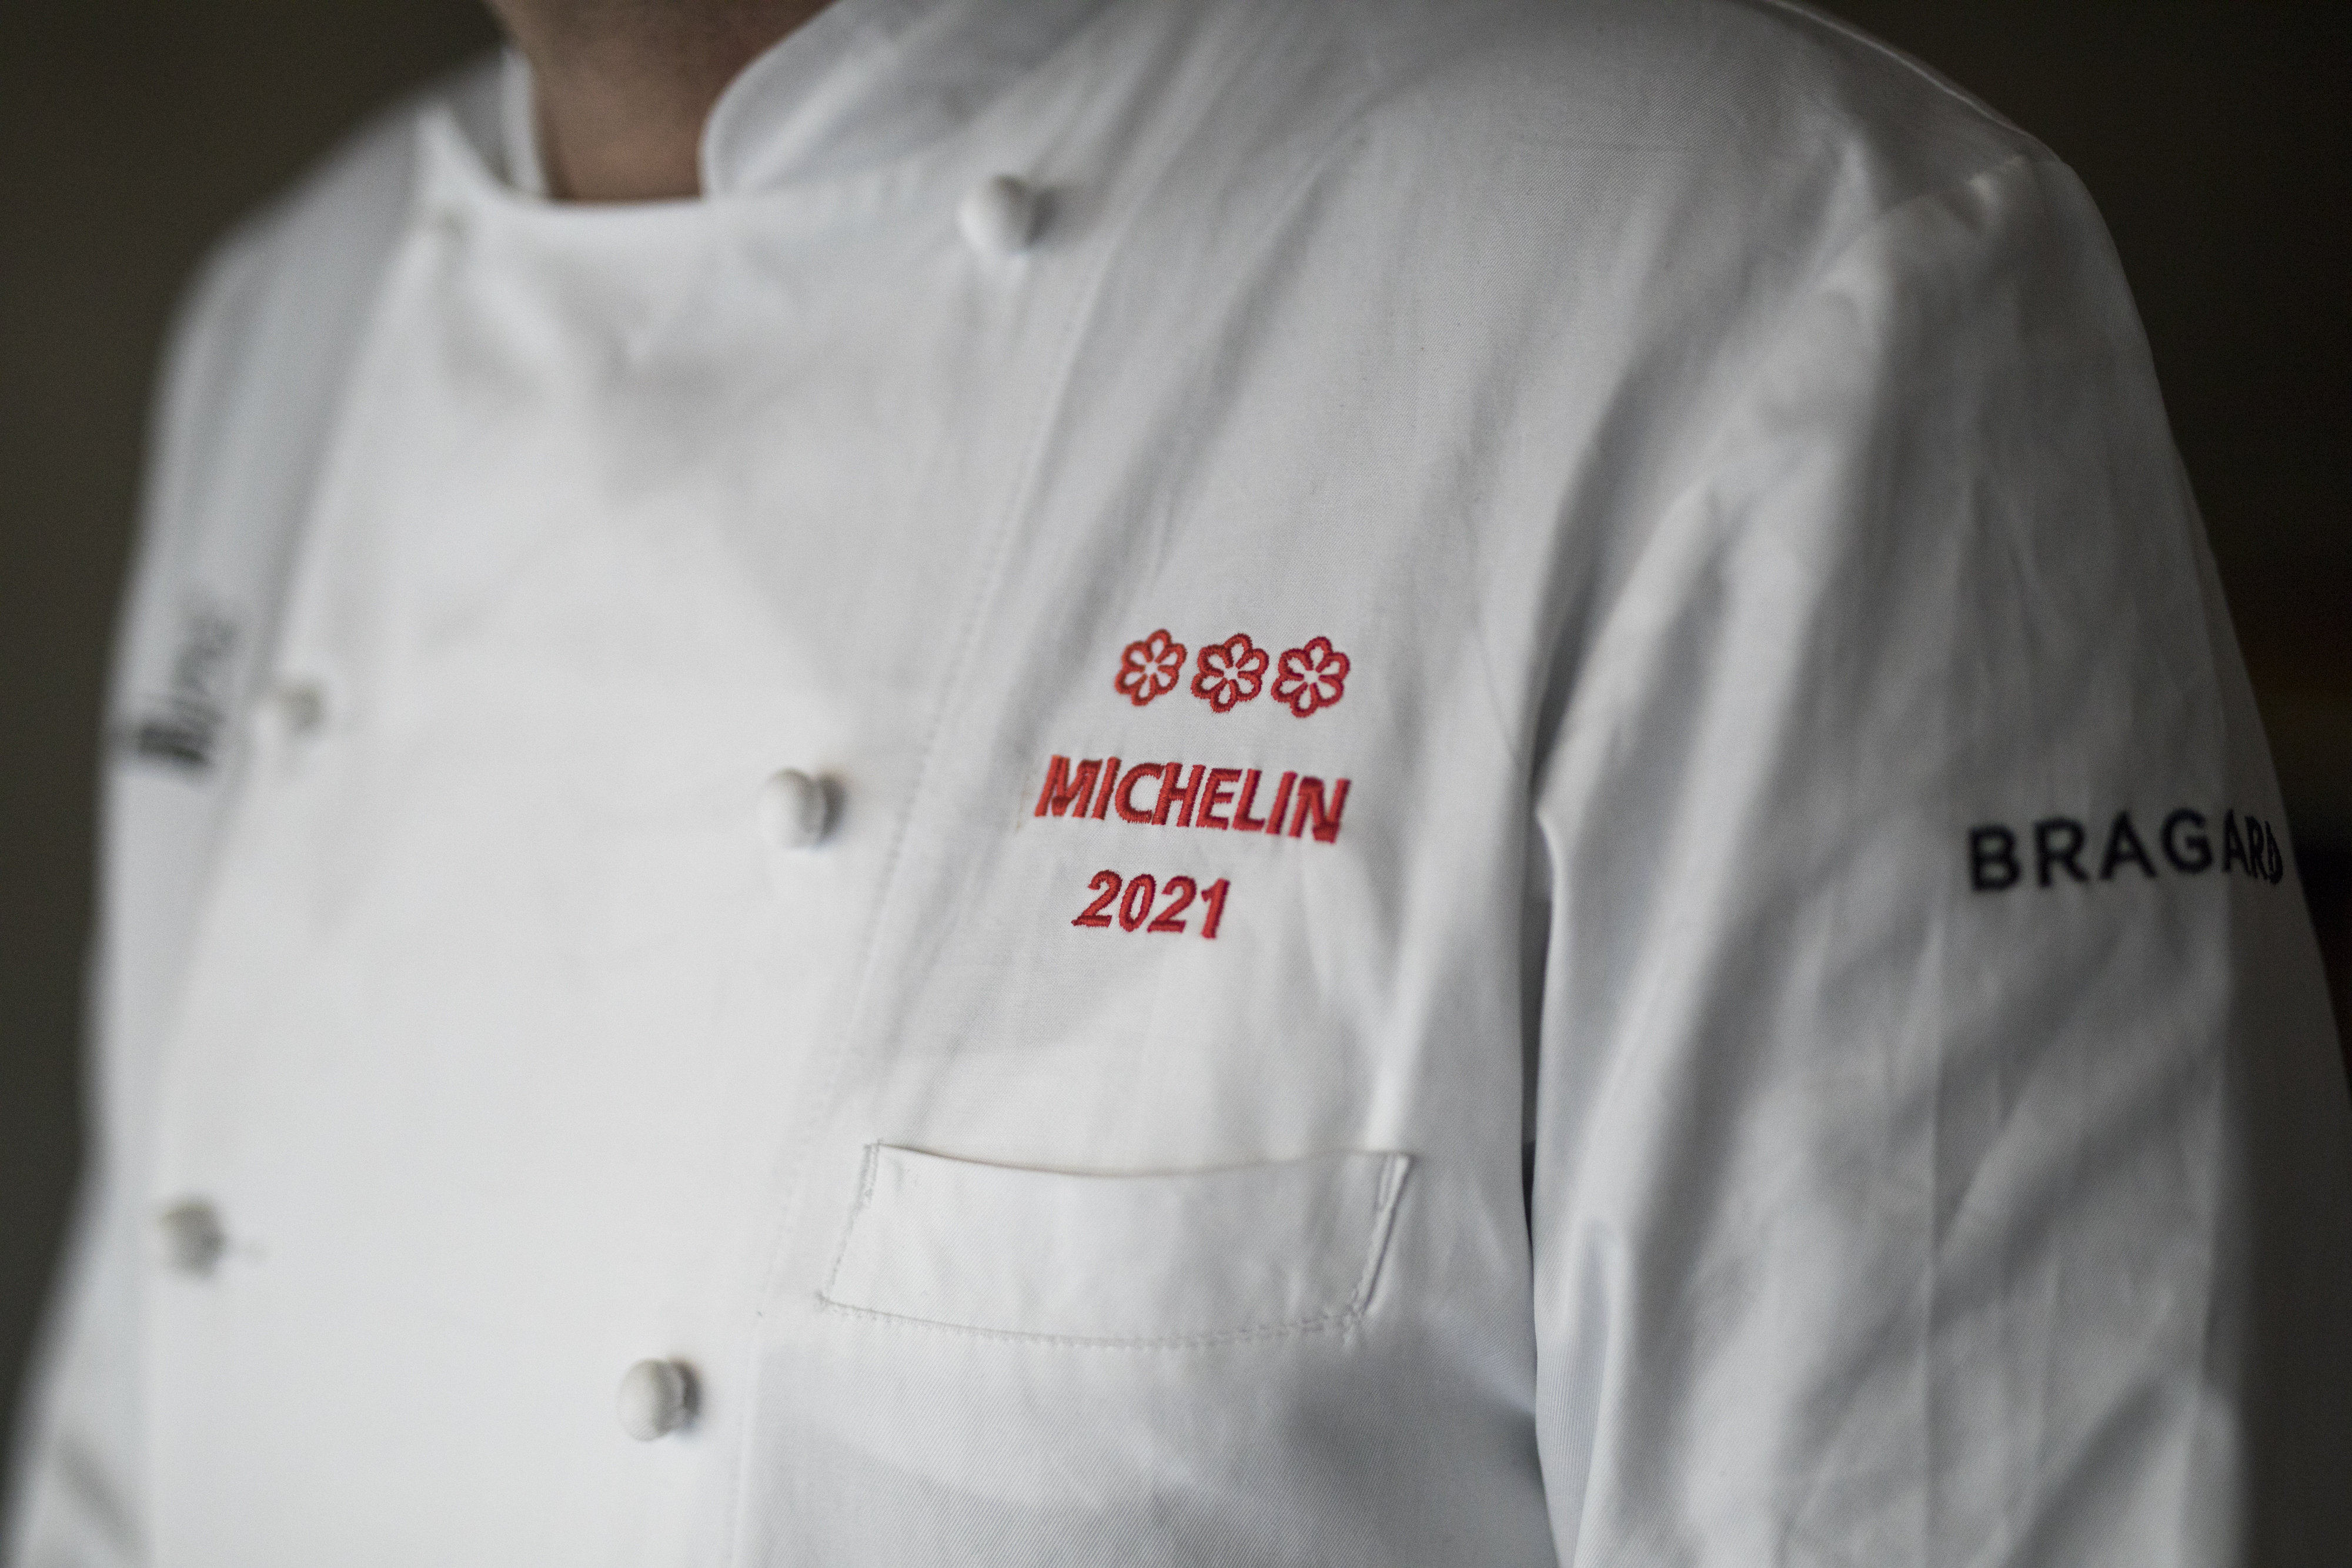 Japanese, contemporary cuisine figure prominently in first Toronto Michelin Guide